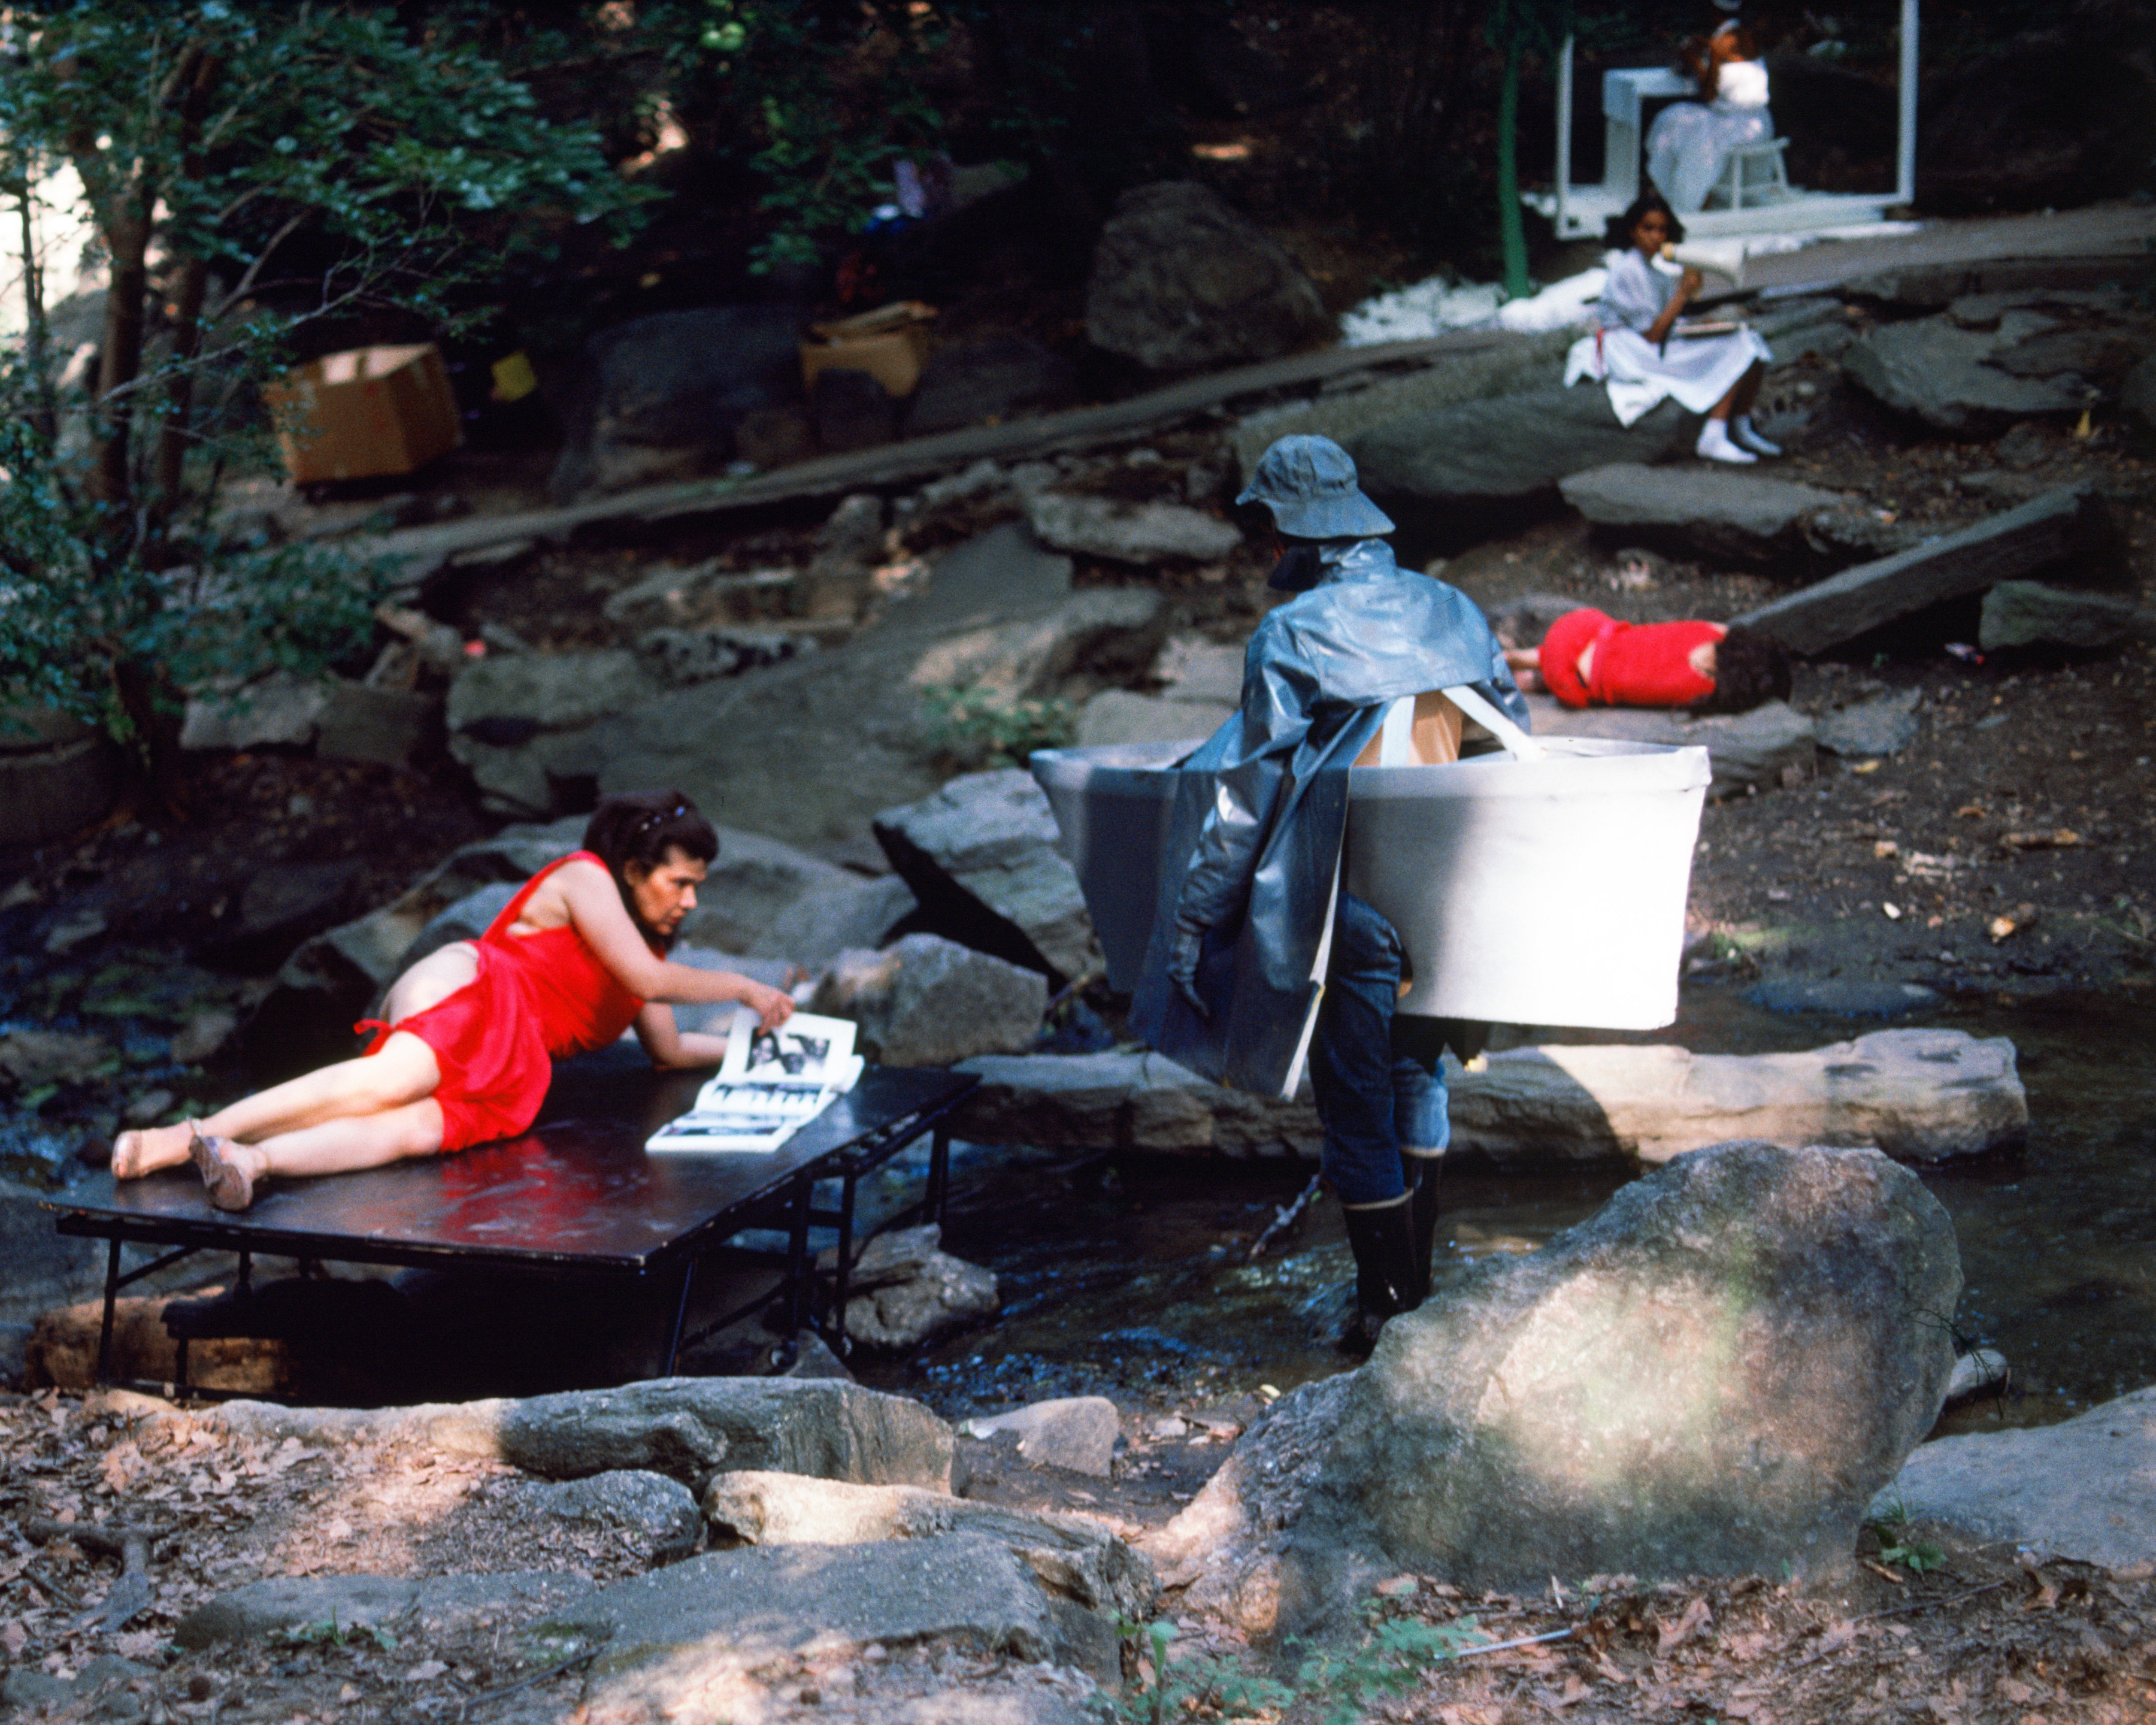 Rivers, First Draft: The Woman in Red returns to her album, and the Nantucket Memorial comes to life, 1982/2015, Digital C-print from Kodachrome 35mm slides in 48 parts, 16h x 20w in (40.64h x 50.80w cm)